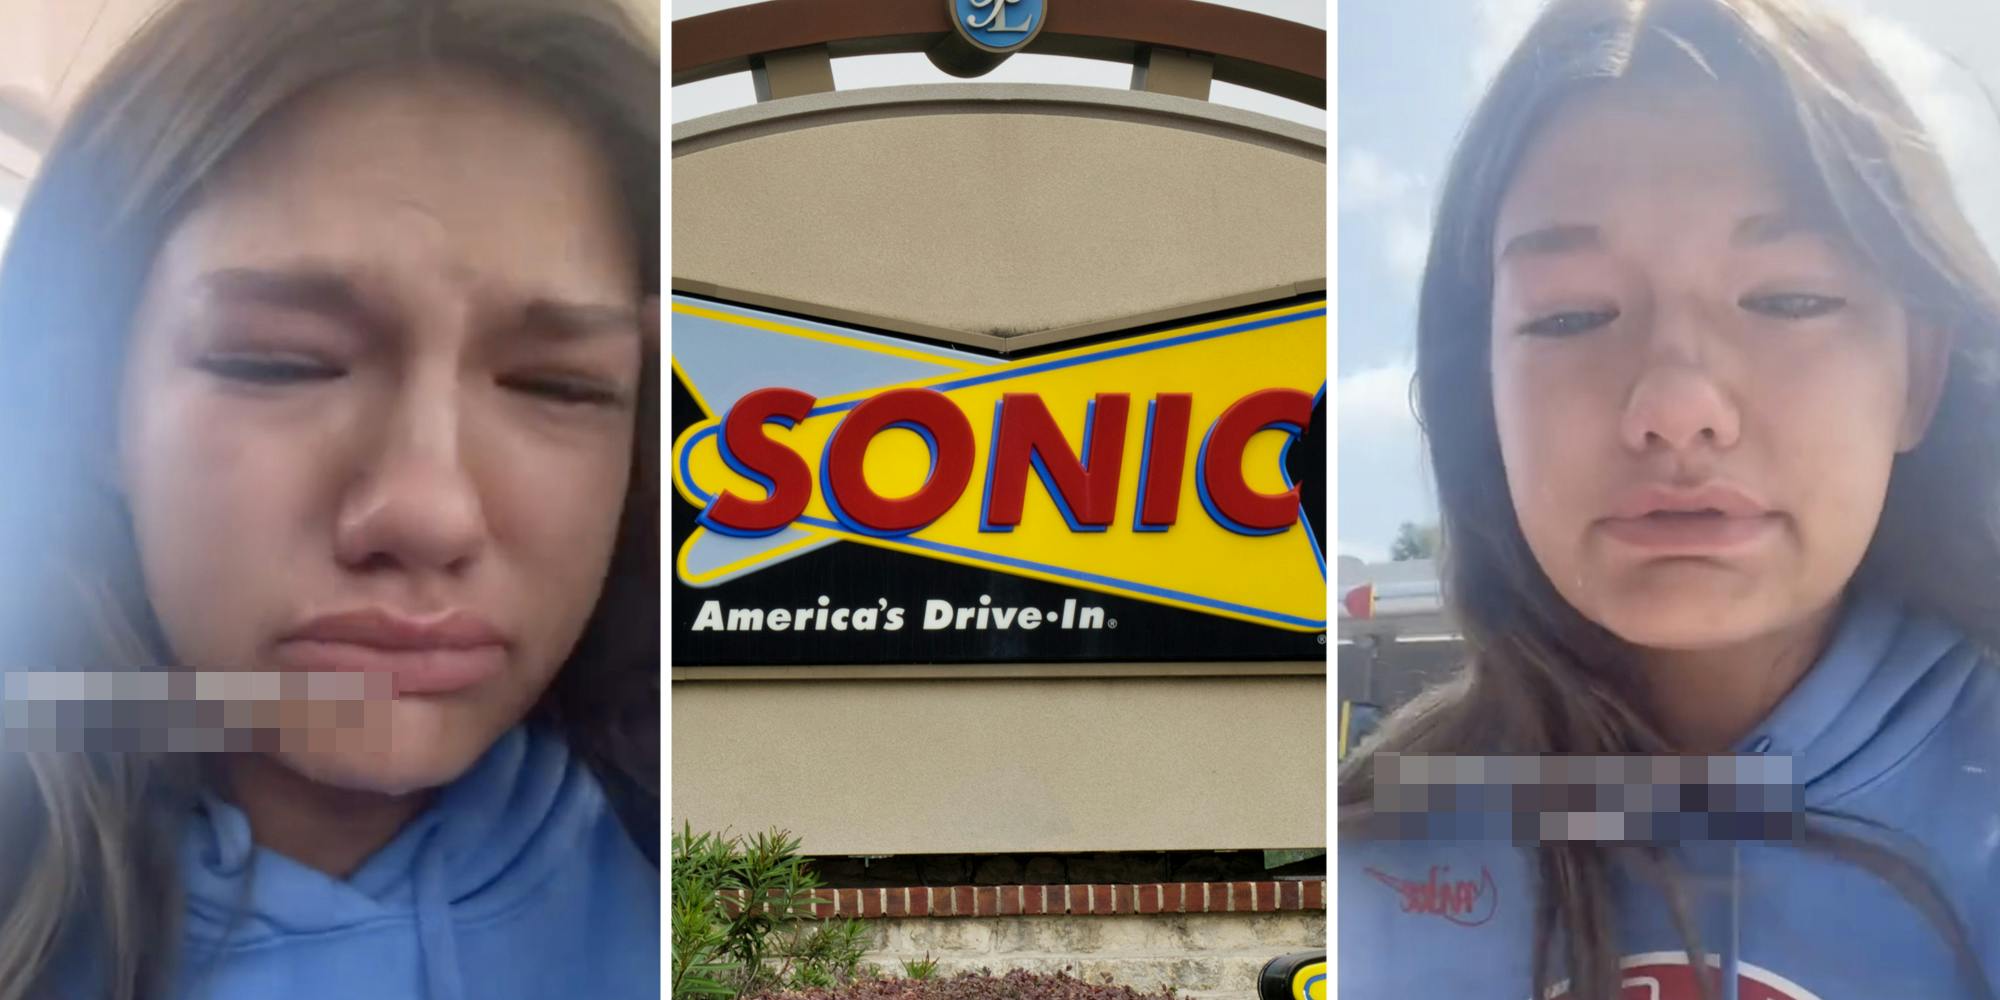 ‘This happens more than you think’: Customer pulls into Sonic stall to order. It backfires